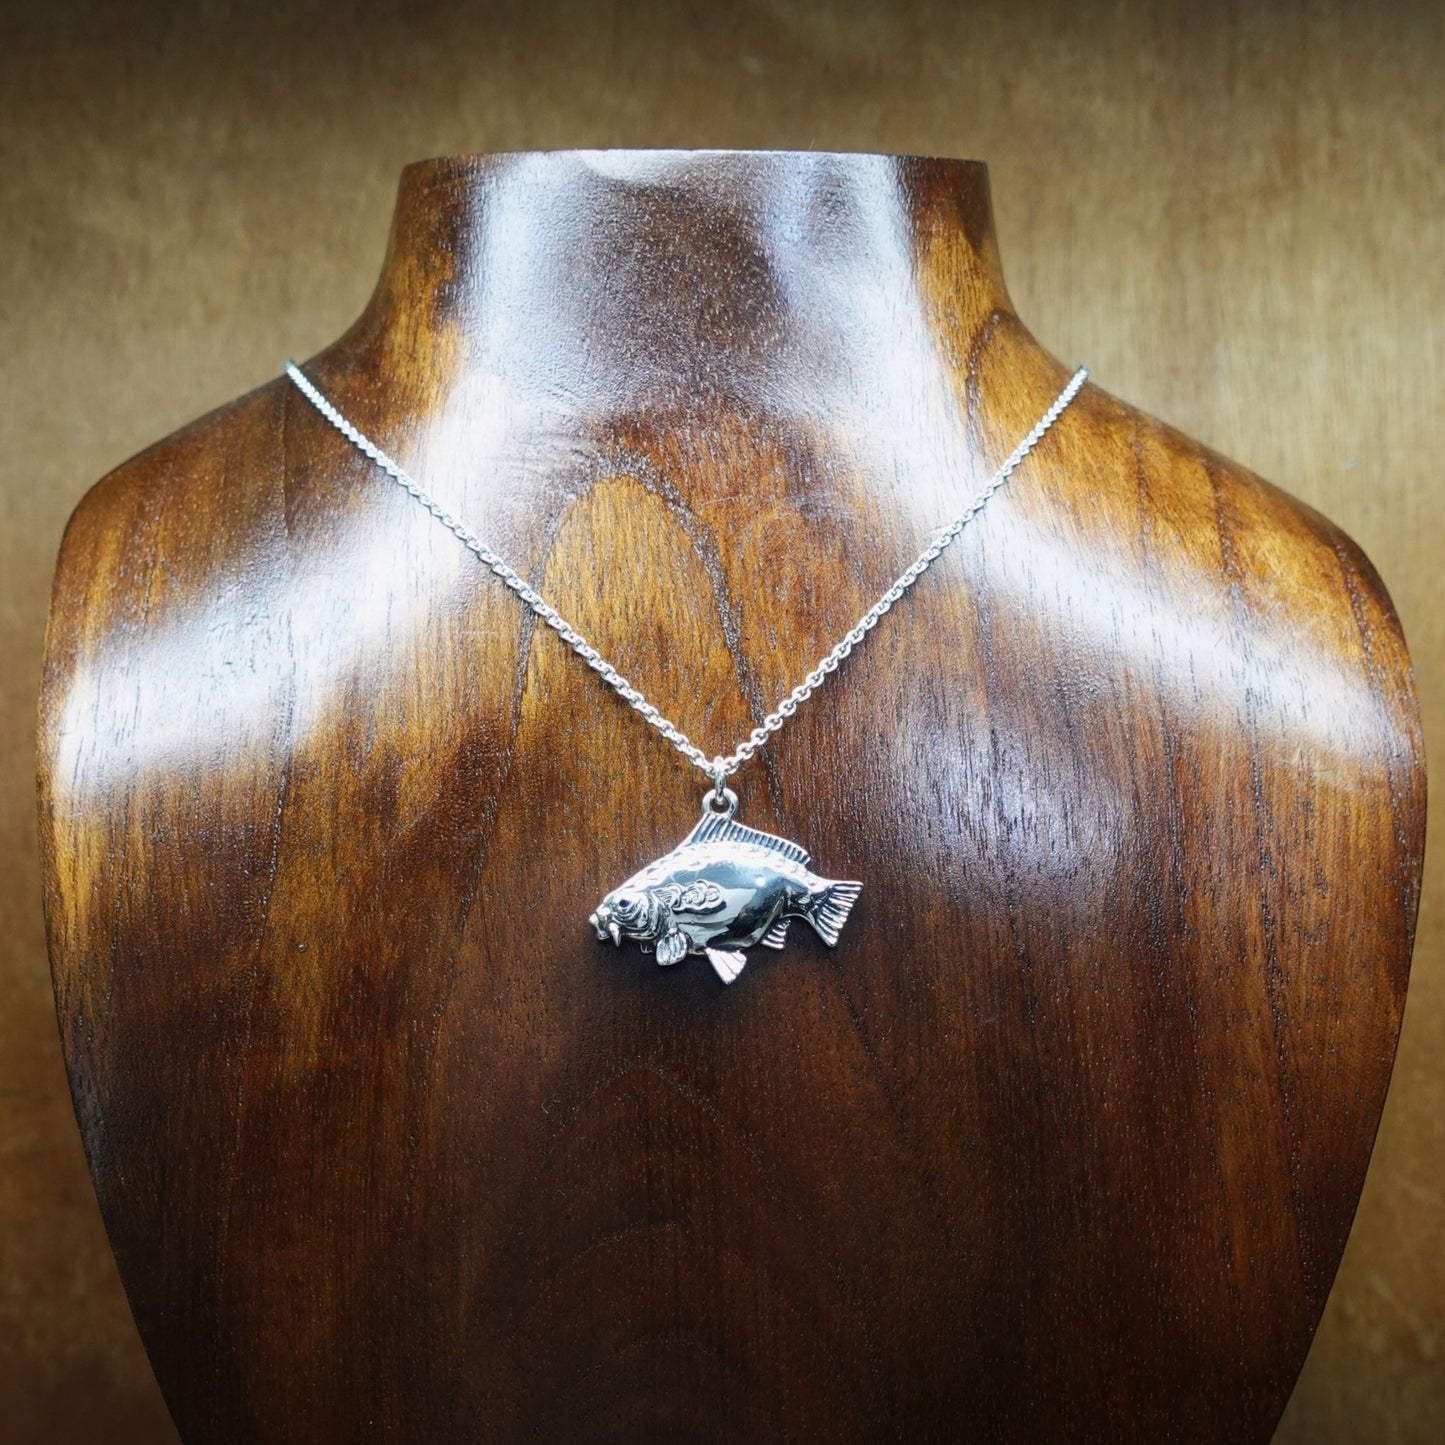 Mirror Carp fishing necklace. Made from sterling silver with an antiqued finish, set with a gemstone eye. Ideal fisherman’s angling gift © Adrian Ashley